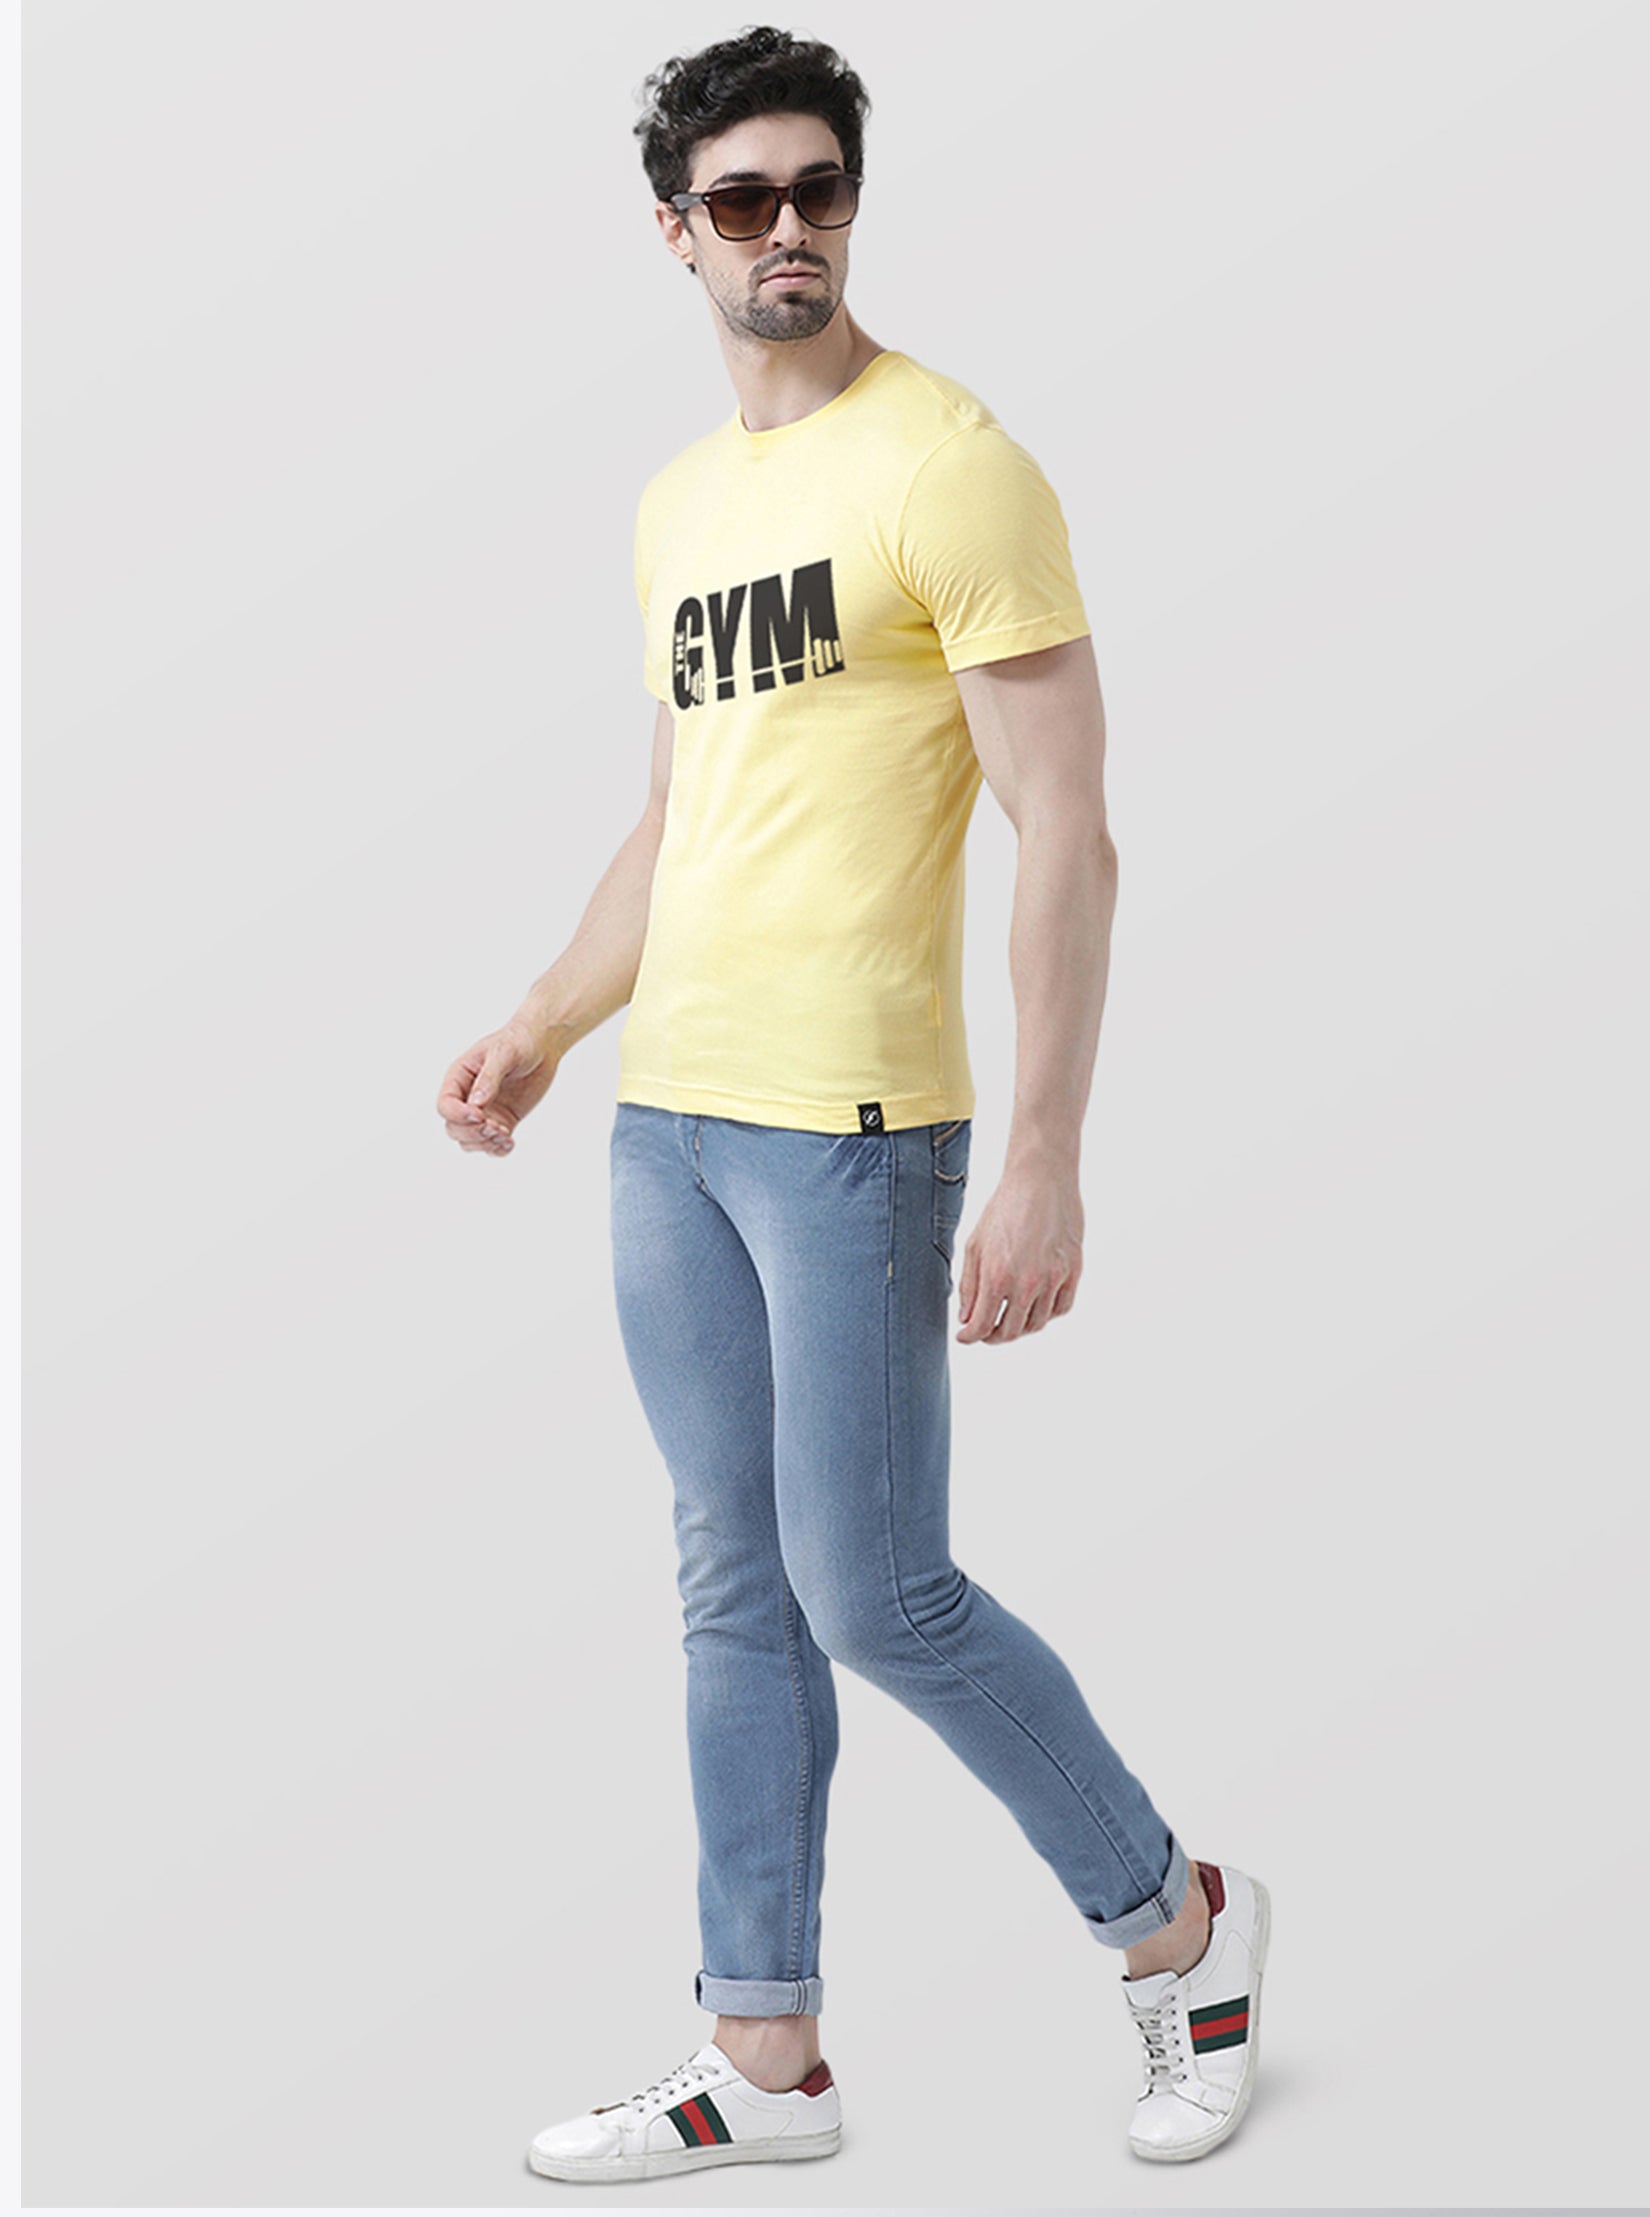 GYM Printed Round Neck Half Sleeves T-shirt - Friskers